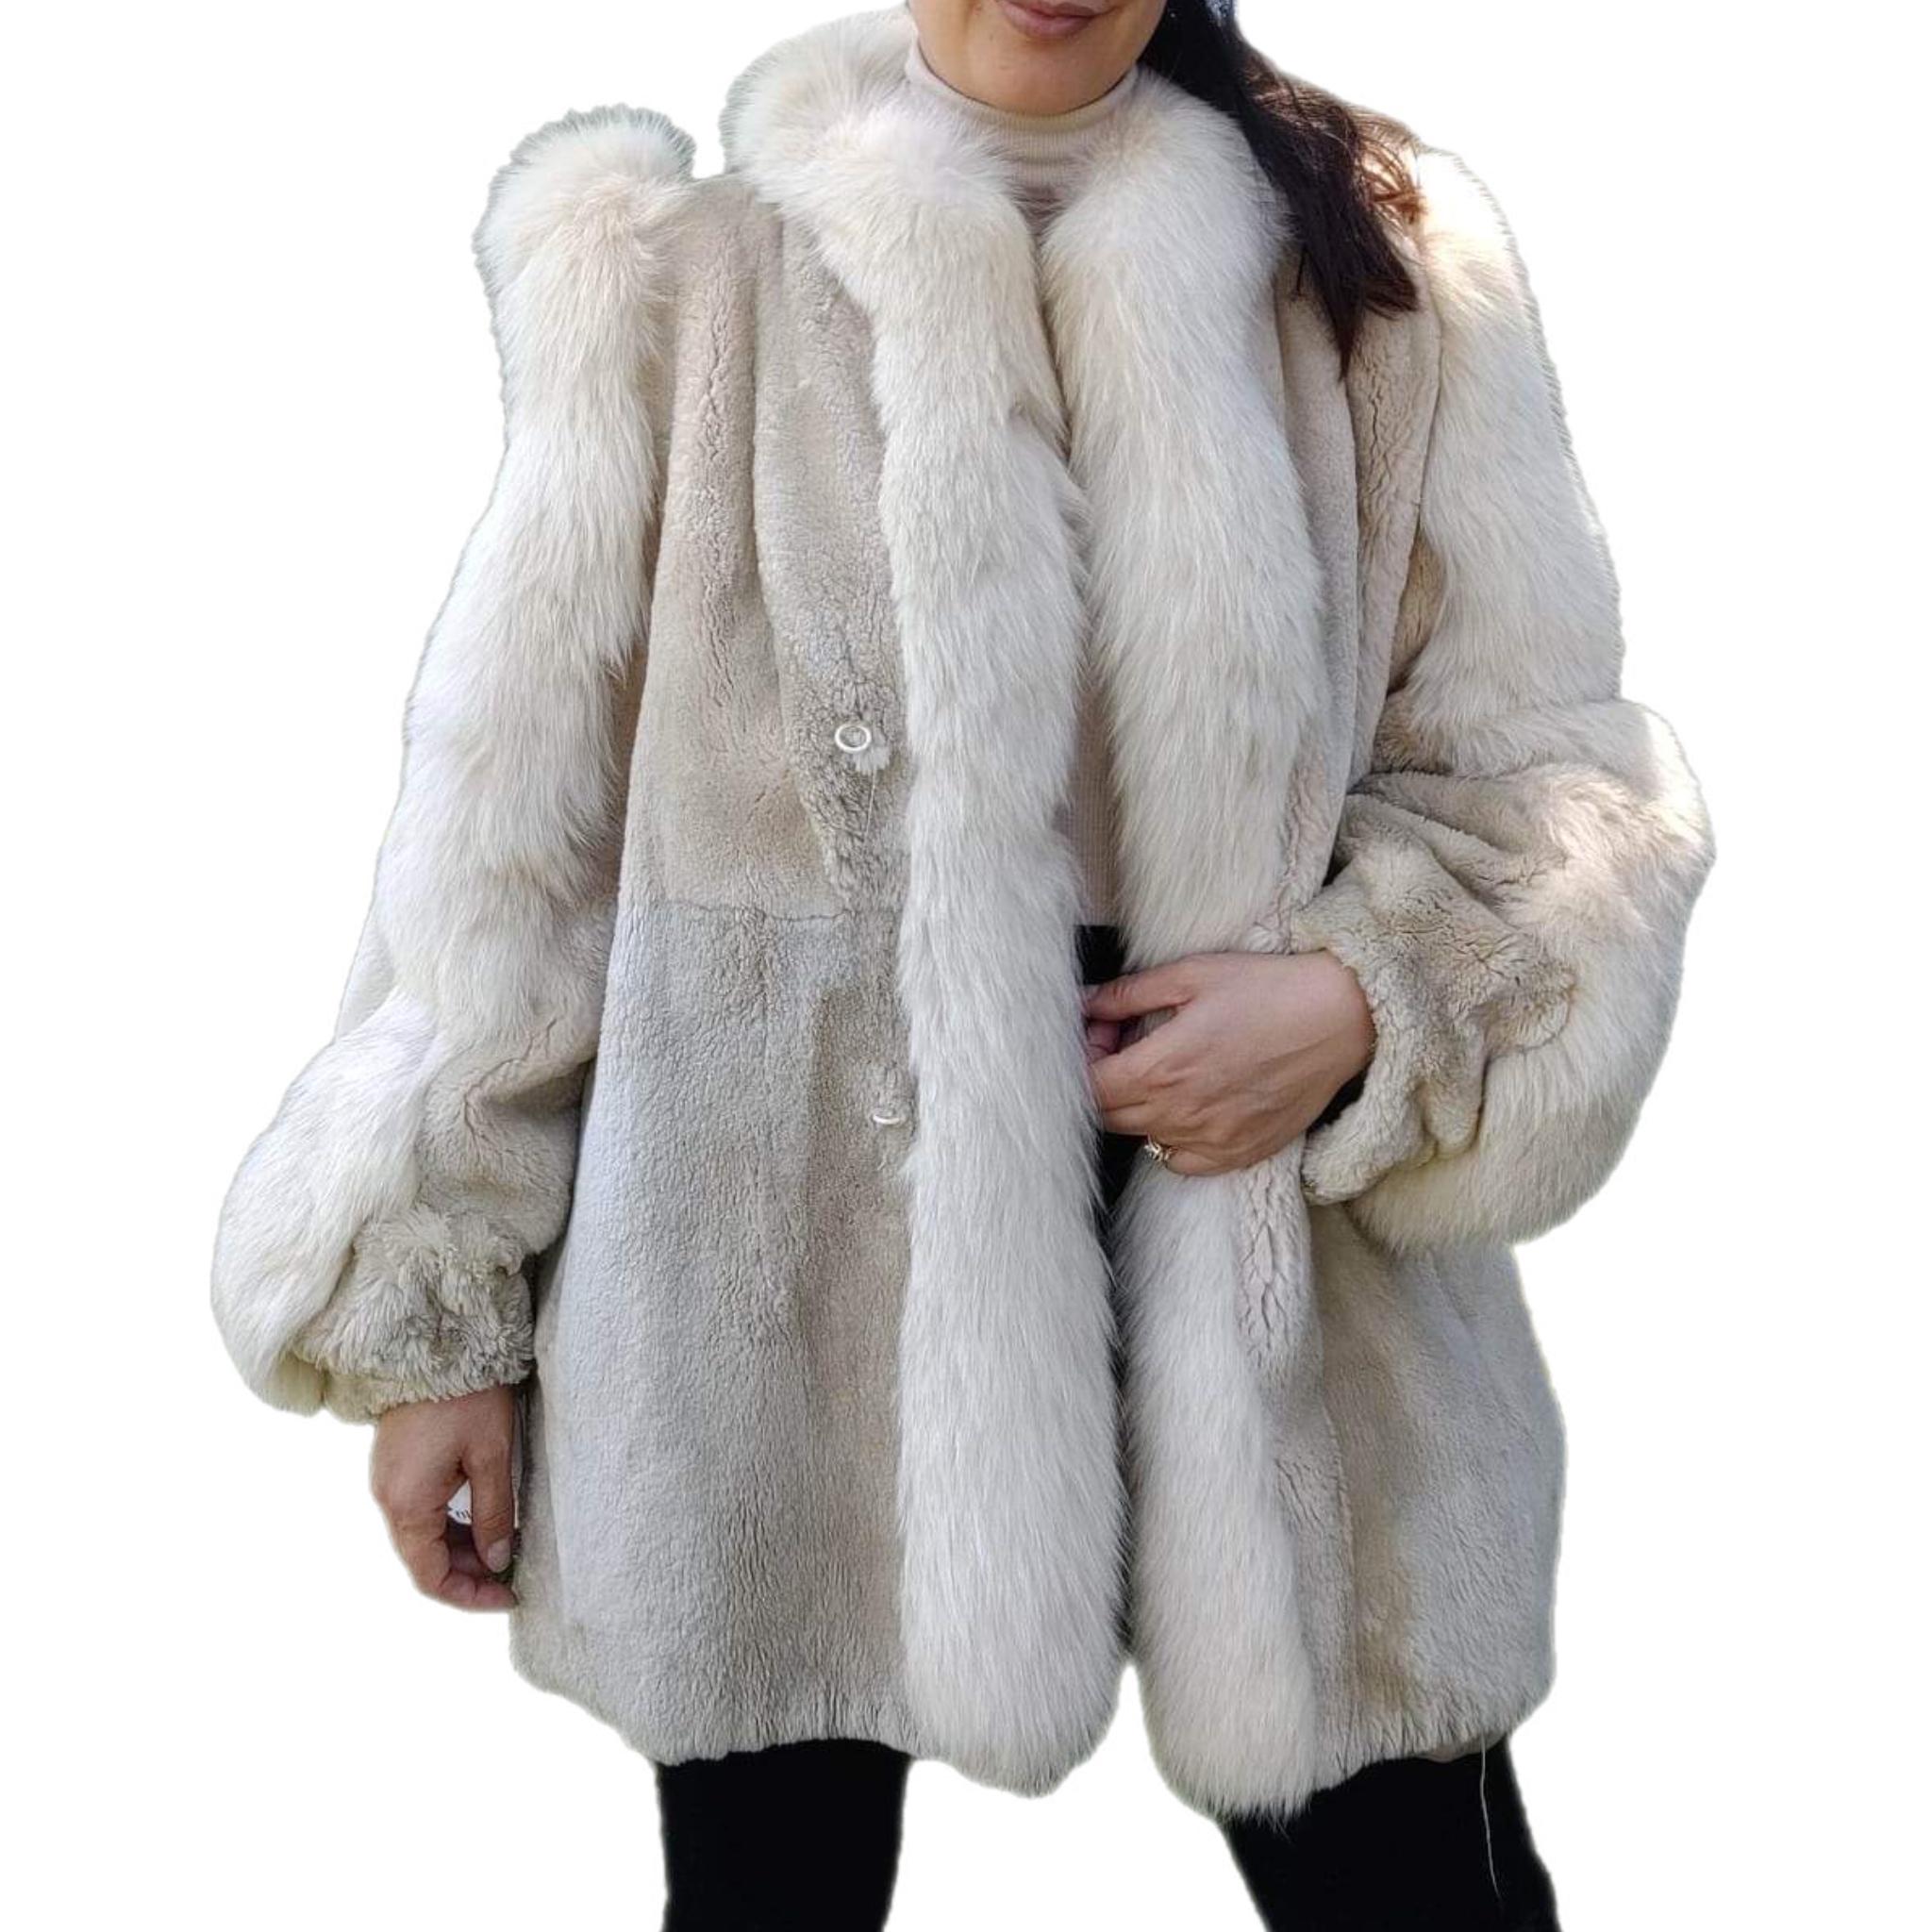 Sheared Beaver Fur Coat with Fur Trim (Size 8-M) For Sale 5